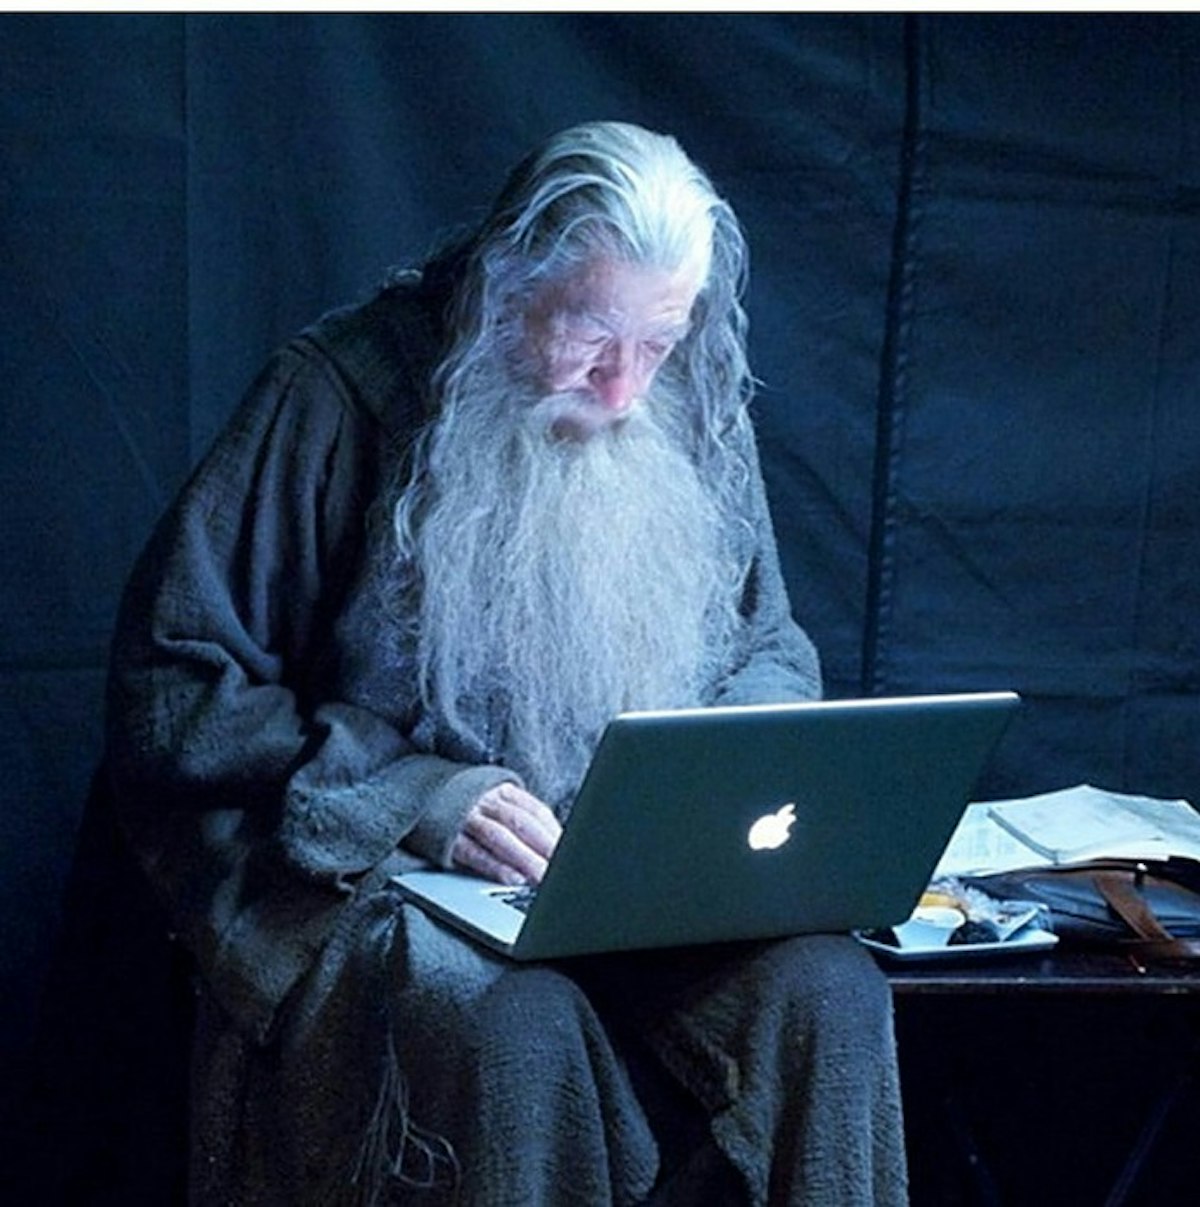 featured image - Coding is Similar to The Lord of The Rings Book : I will prove that